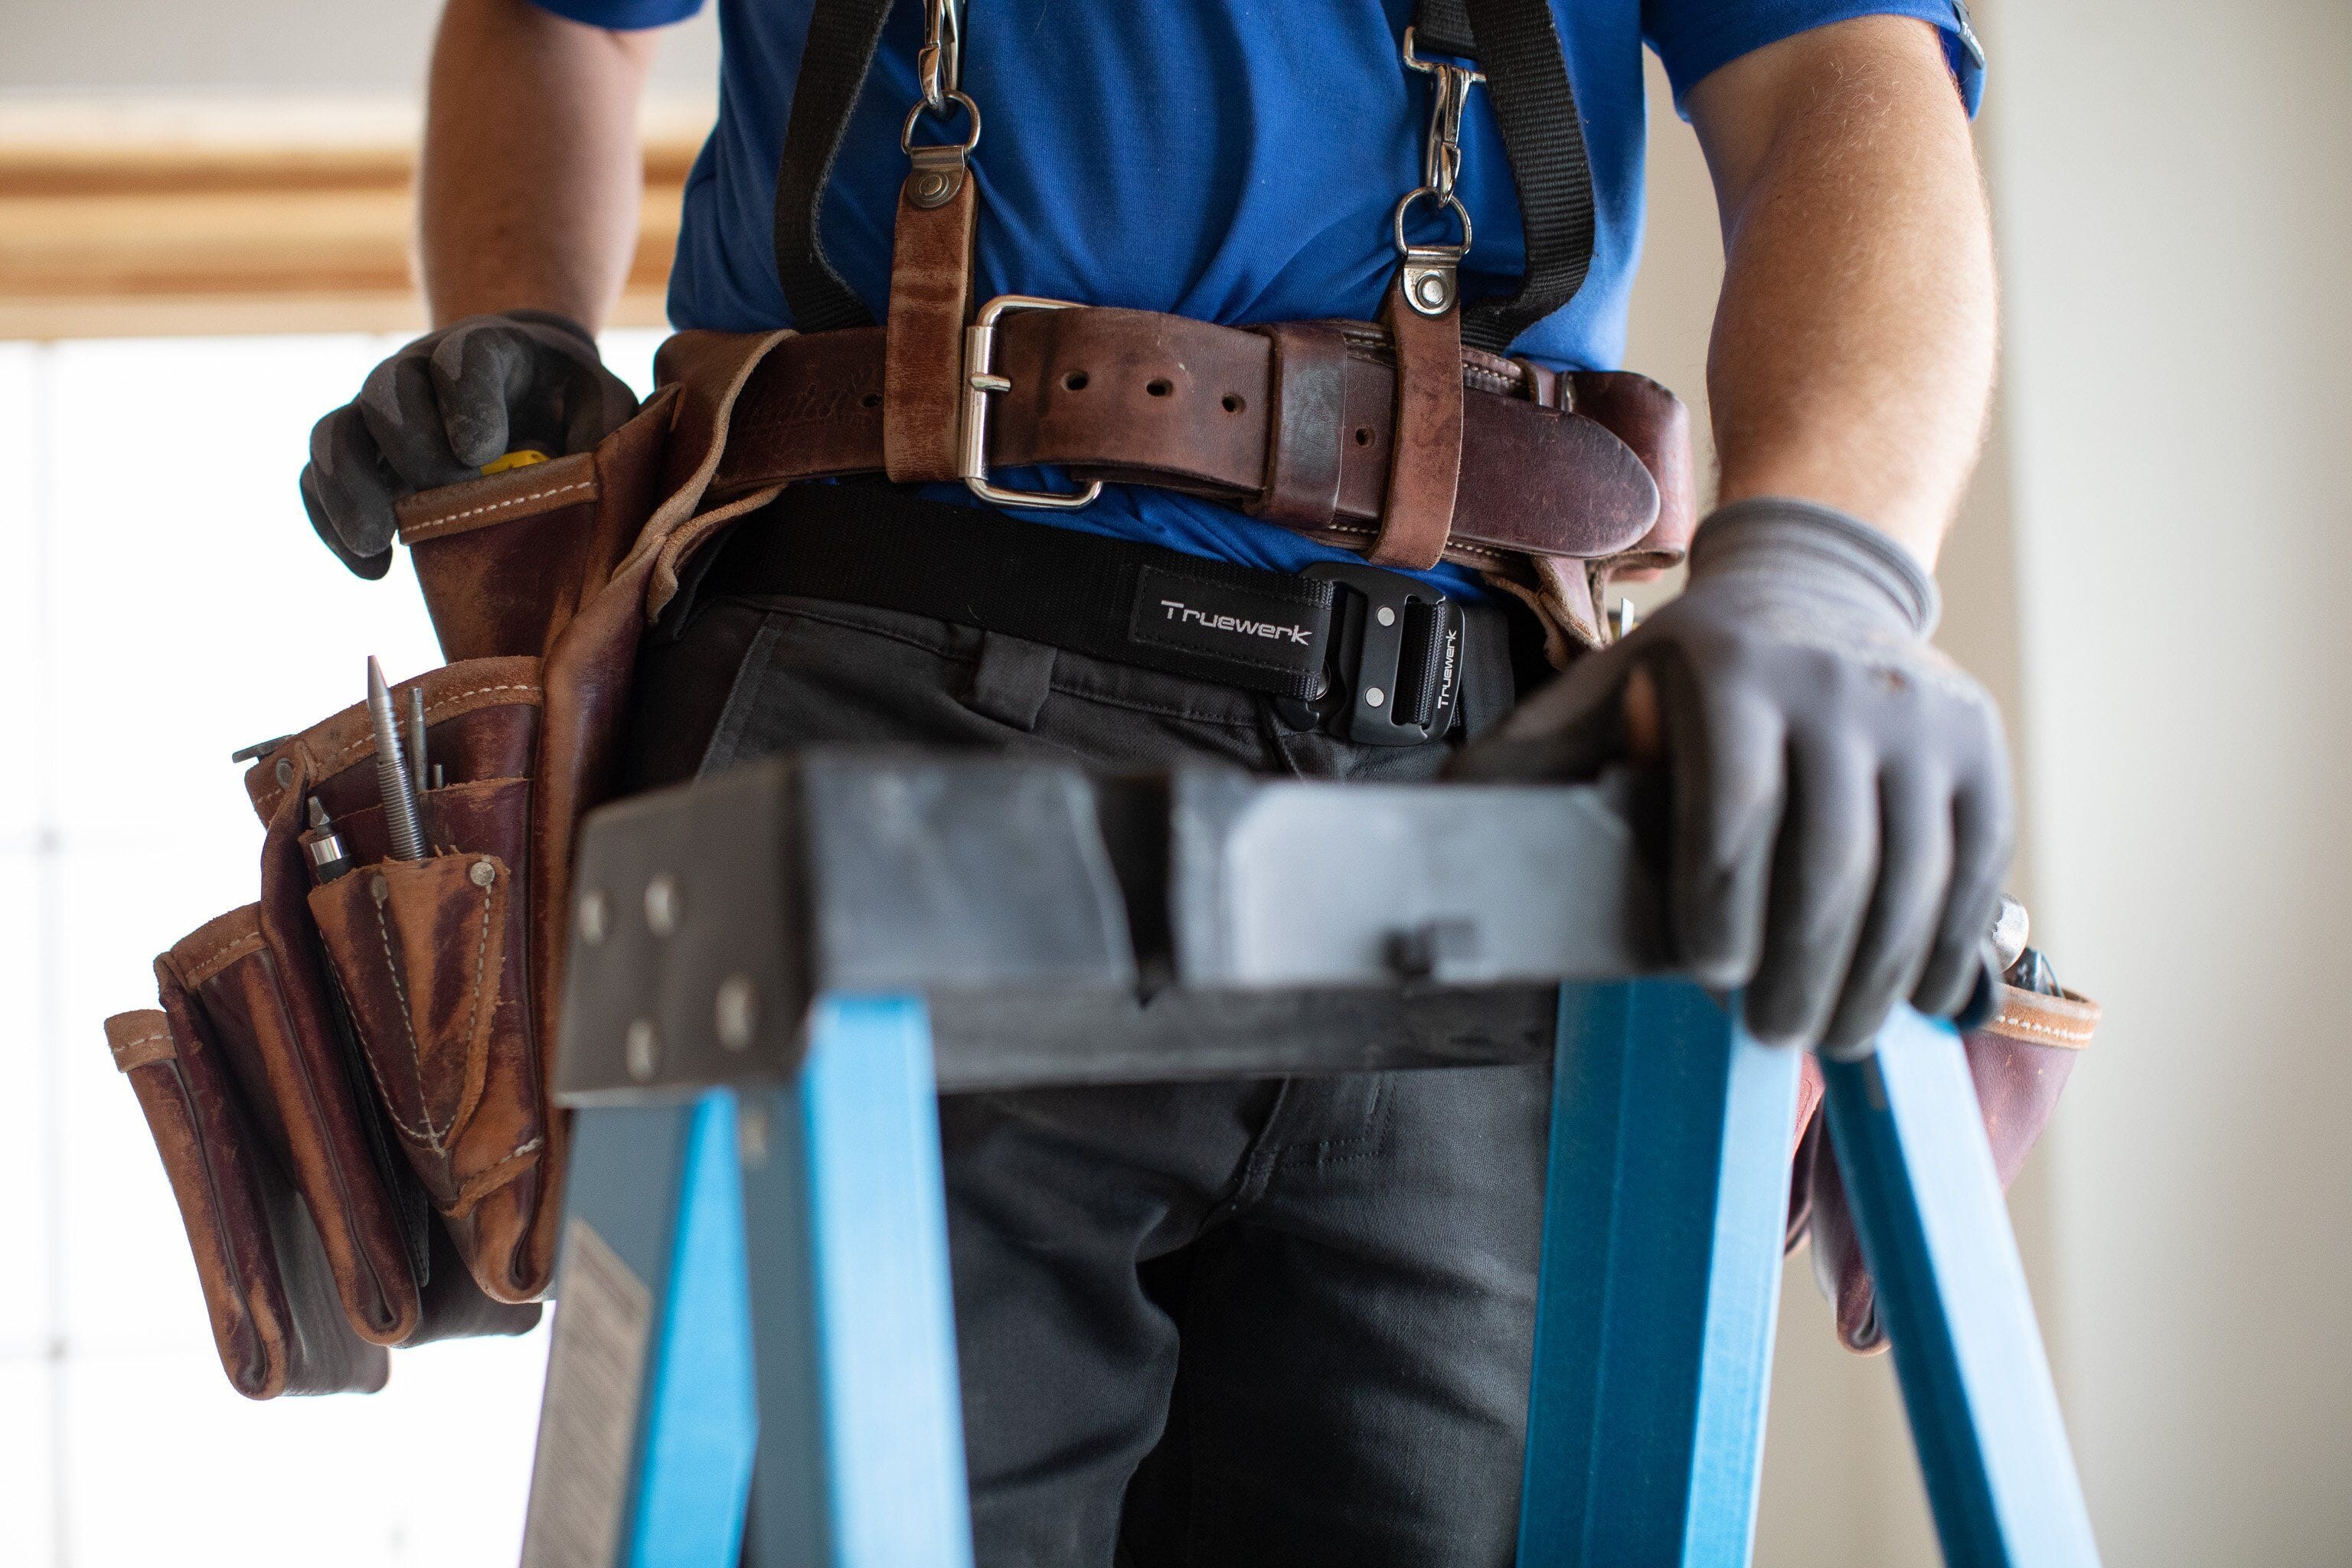 A male construction professional wears gray Truewerk WerkPants, a Truewerk belt, and a harness as he prepares to work on a stand.